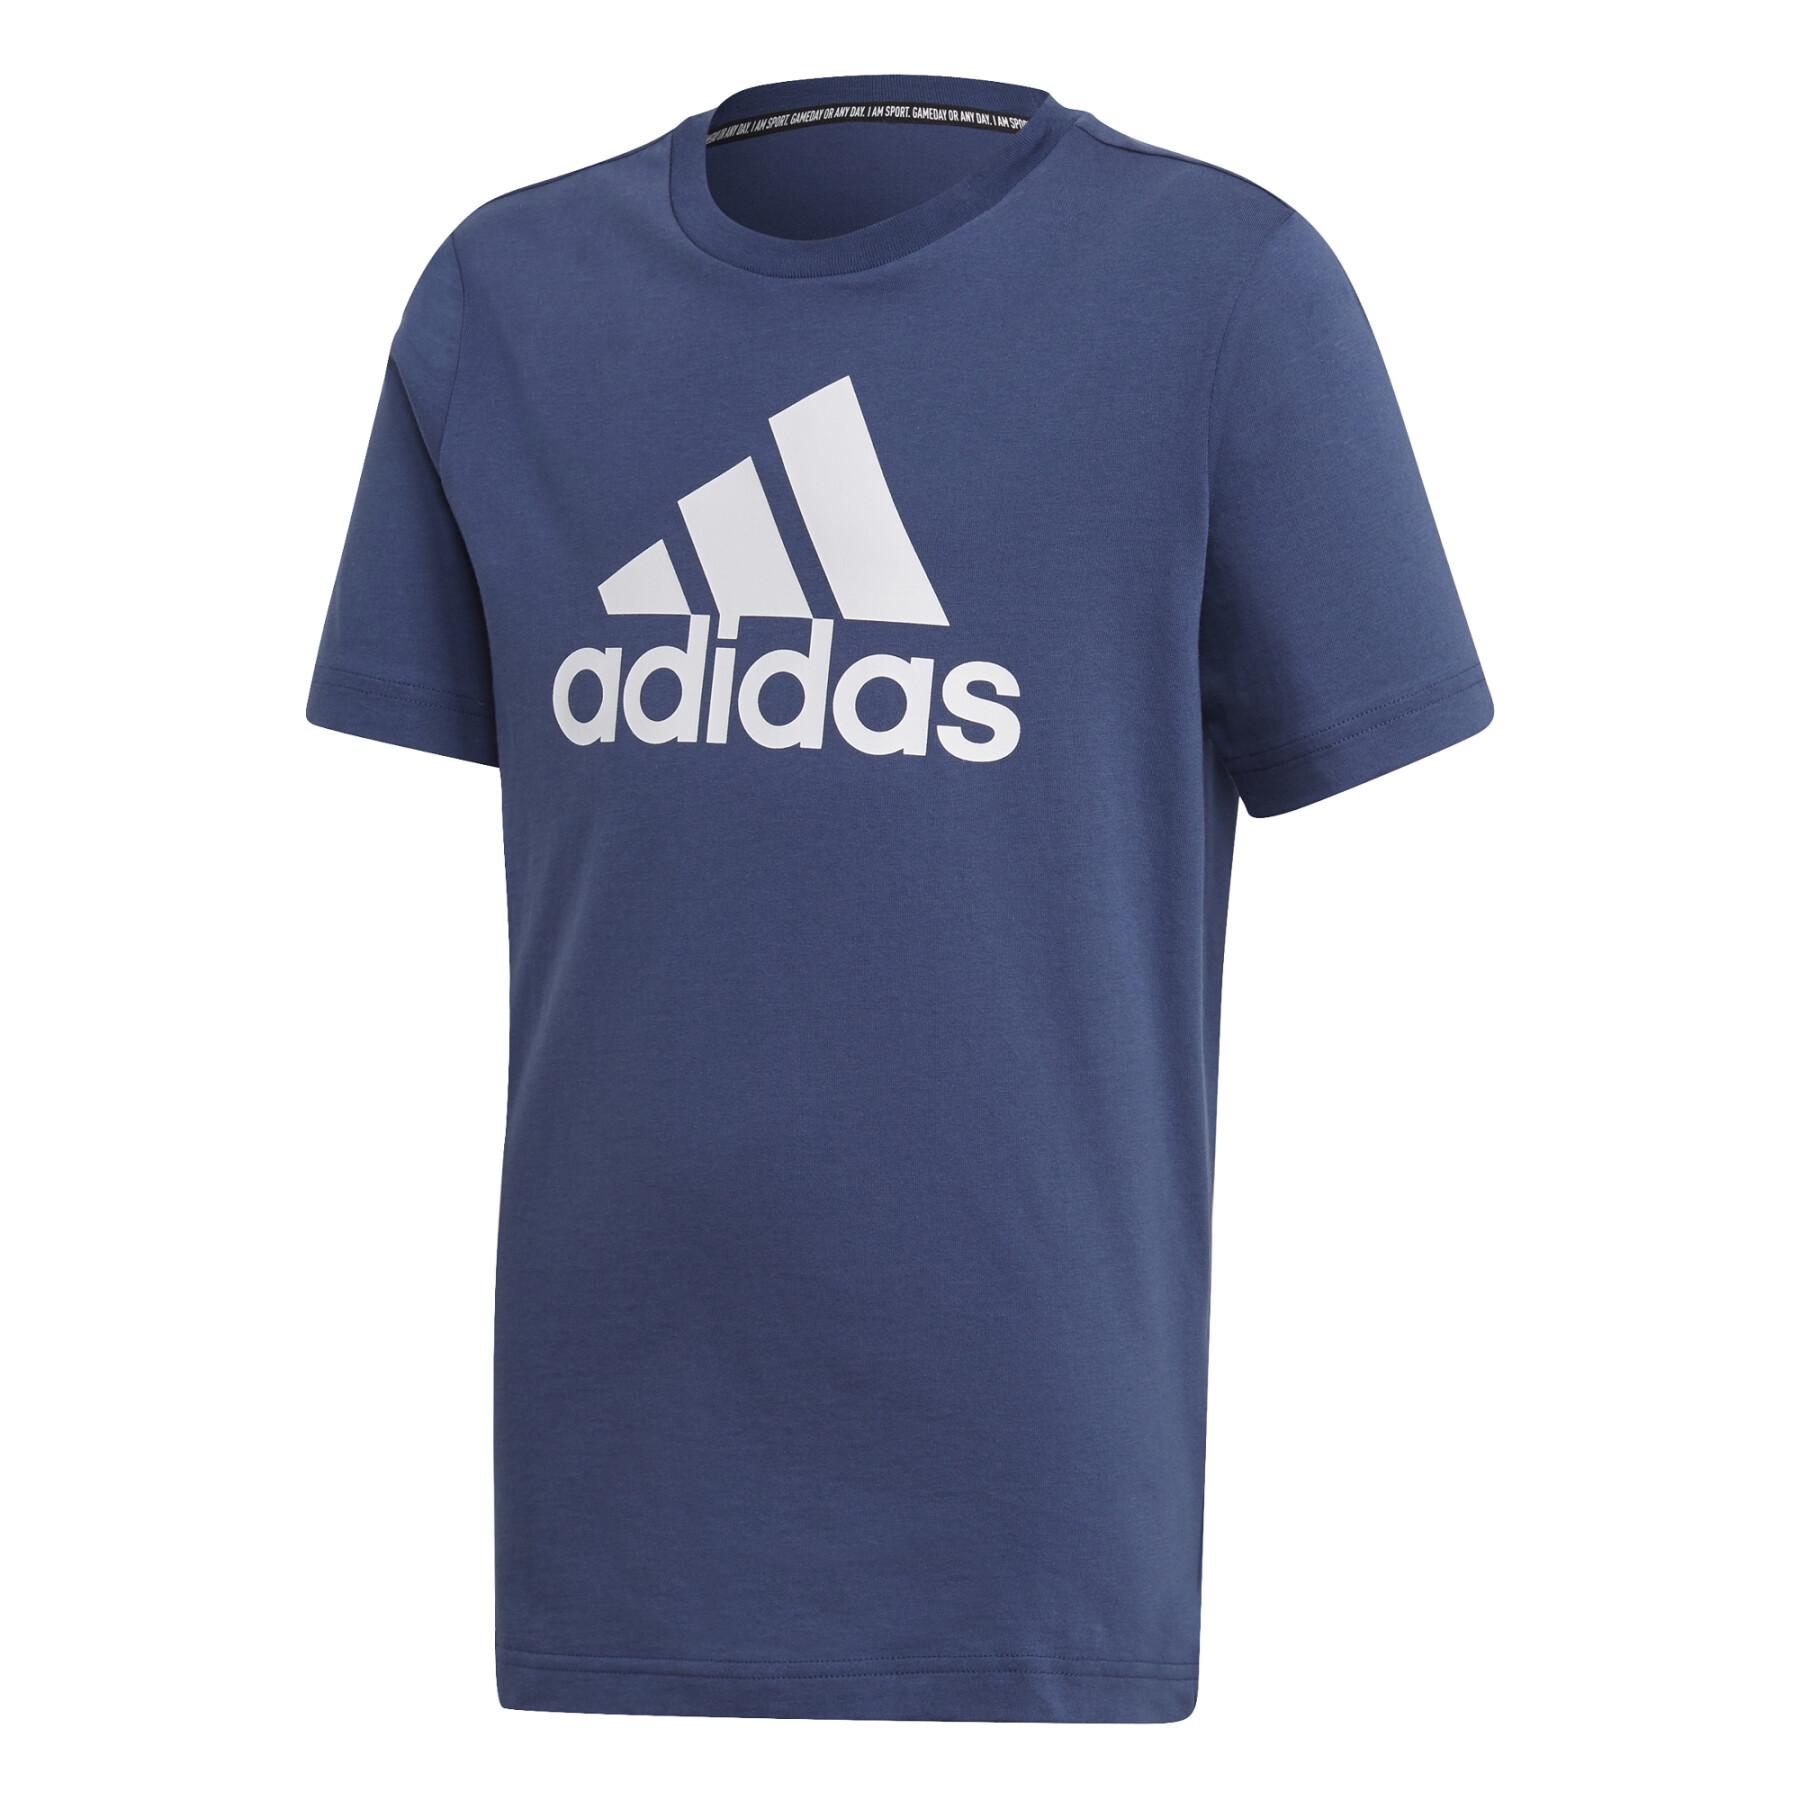 Child's T-shirt adidas Must Haves BoS